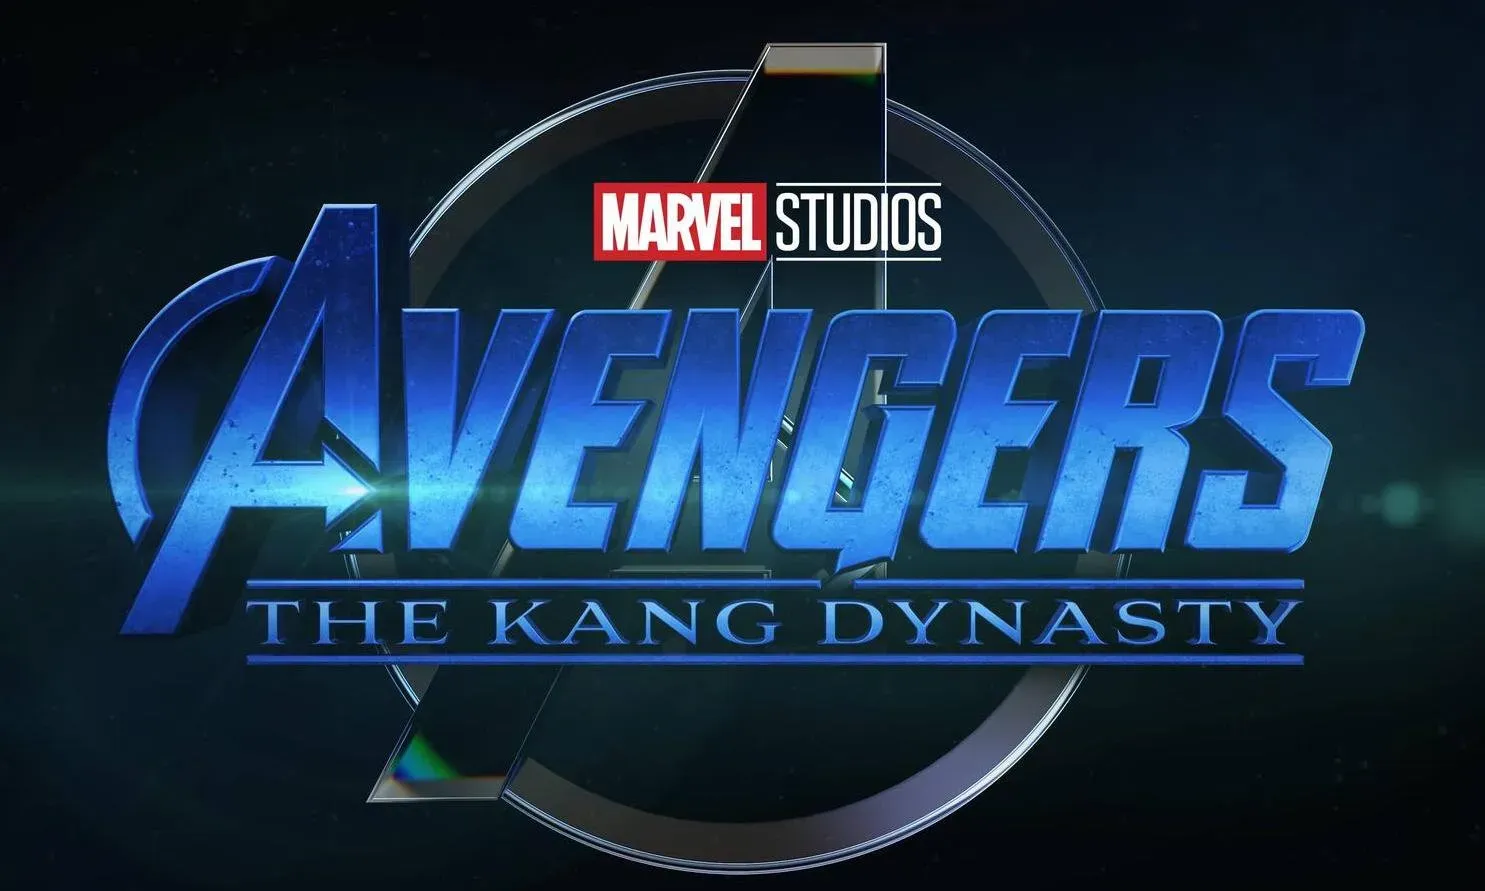 Marvel President Kevin Feige on "The Avengers: The Kang Dynasty" is long overdue: there is no shortage of Marvel multi-hero films | FMV6